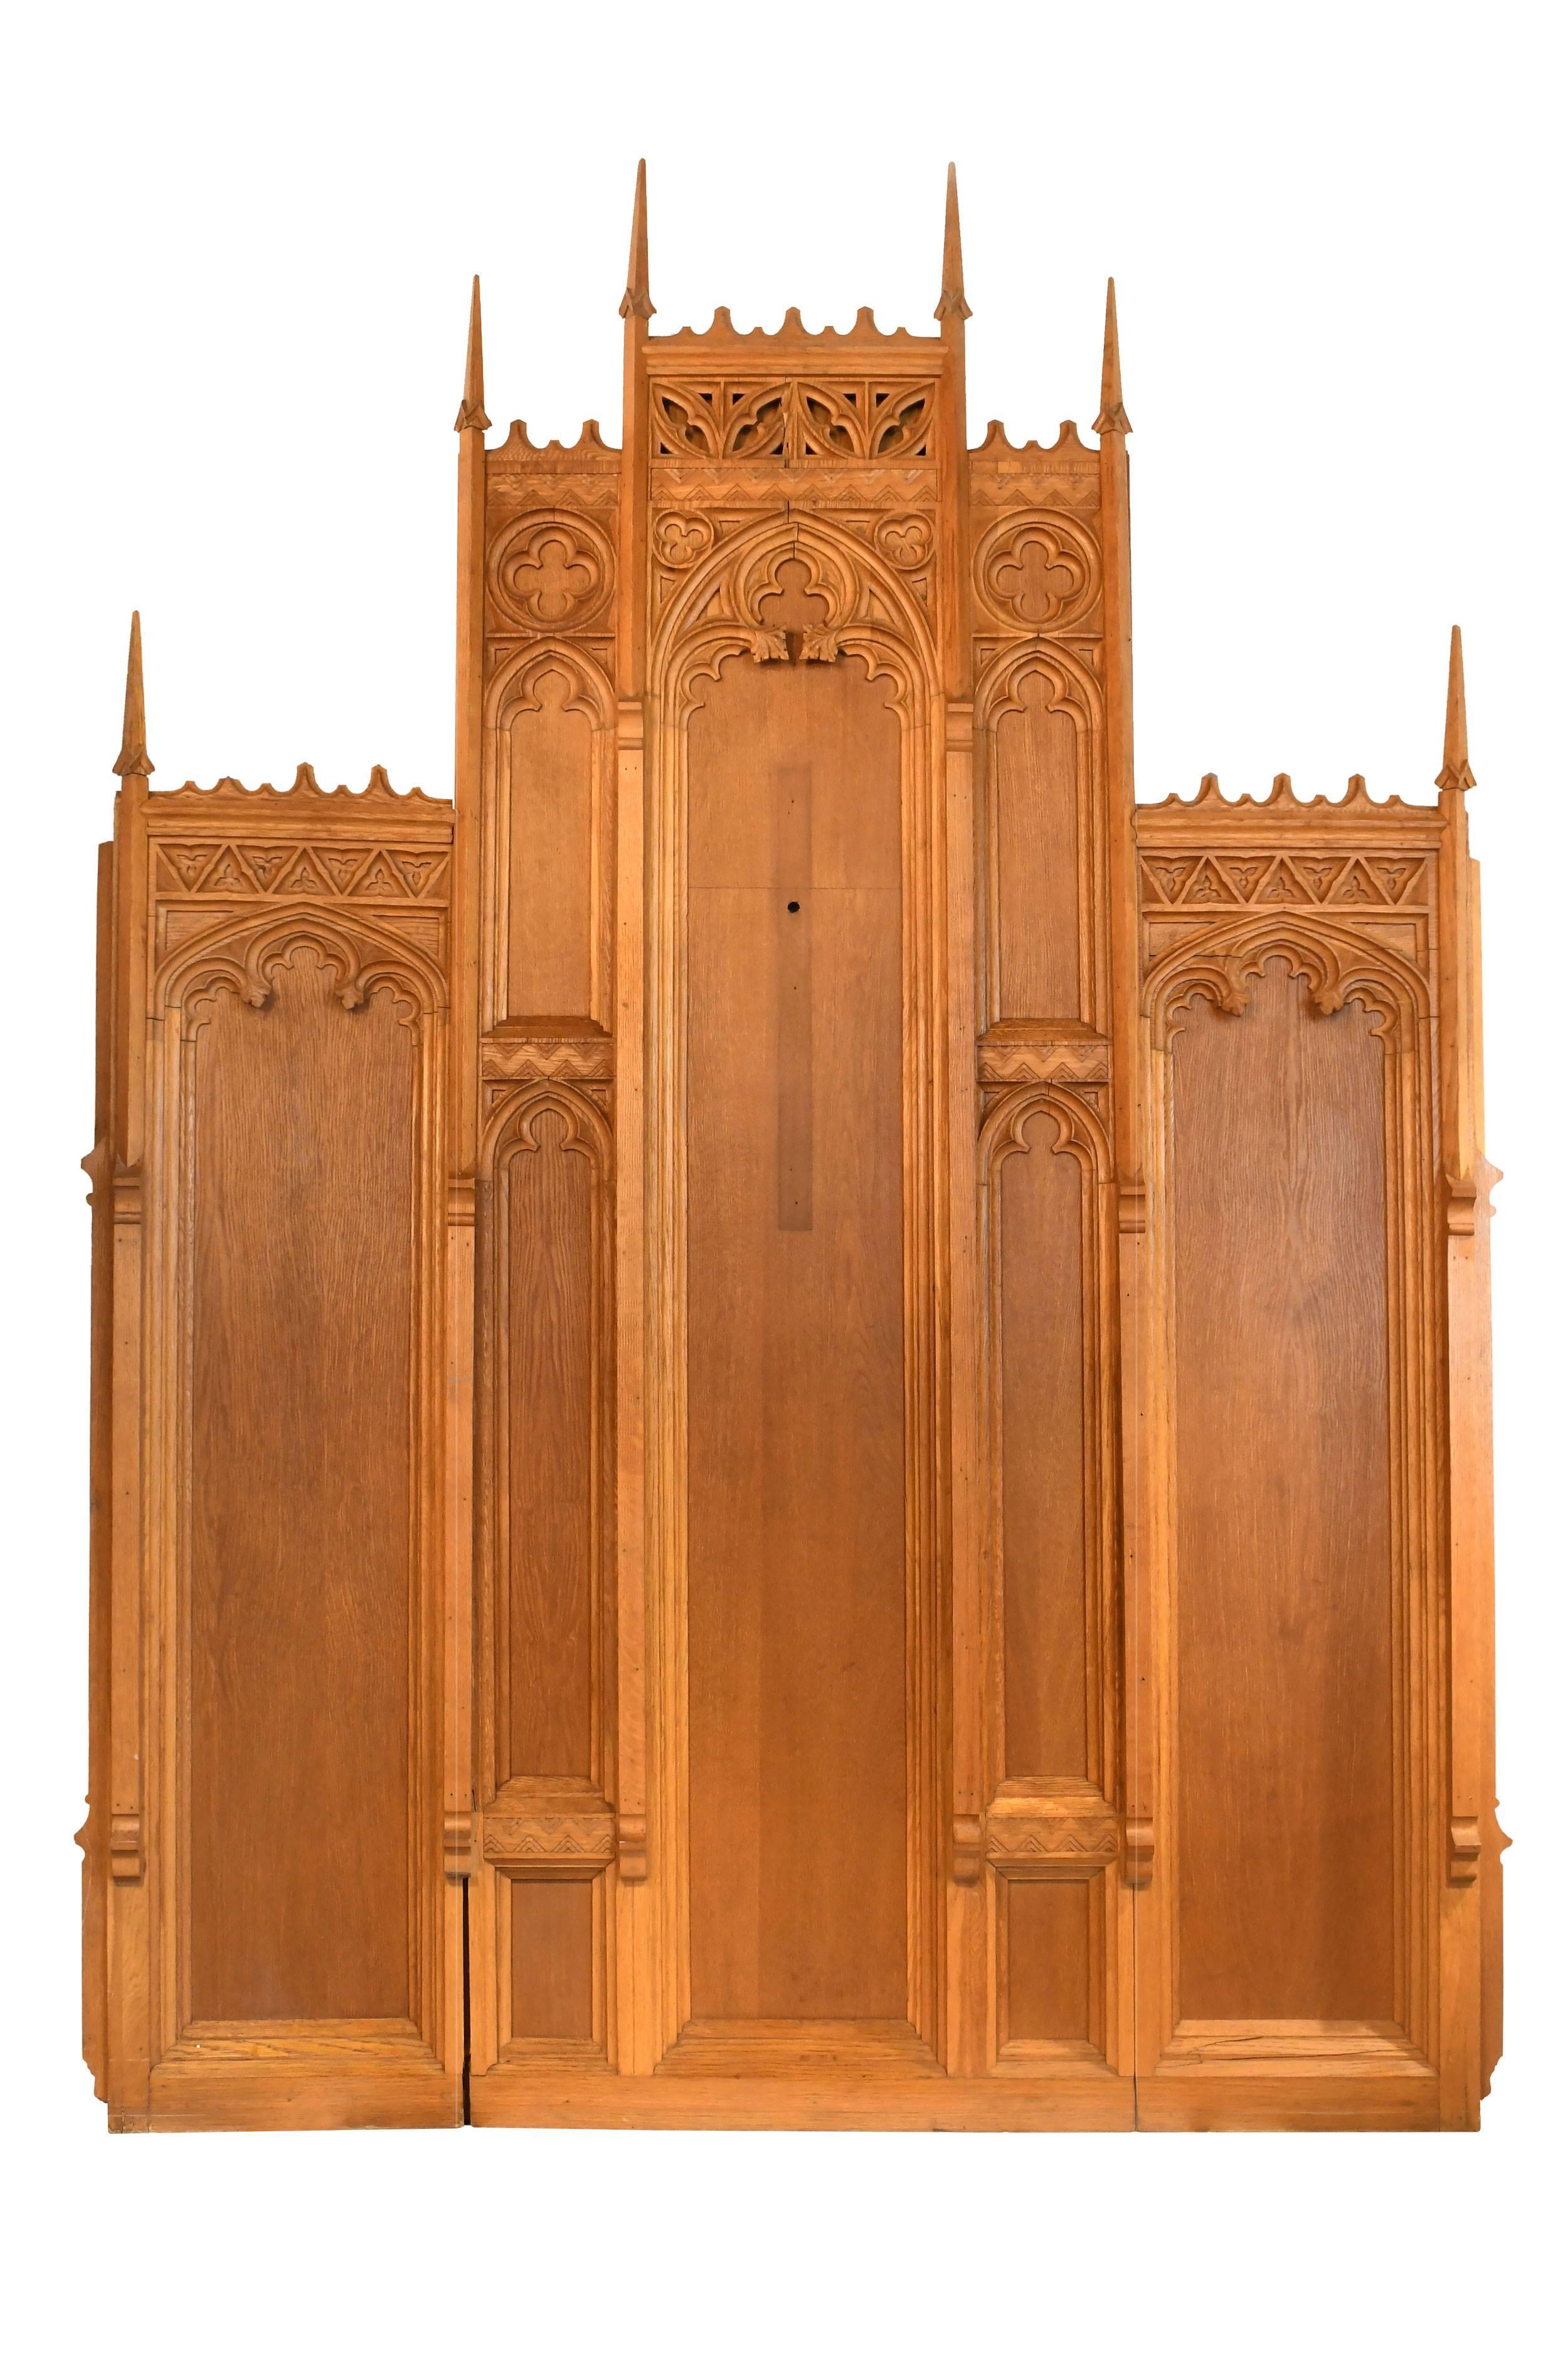 This incredible three piece oak altarpiece will add a sense of drama to any space. Spire-like finials, Gothic elements, and quartersawn details are peppered throughout, adding an abundance of architectural interest,

circa 1930
Condition: